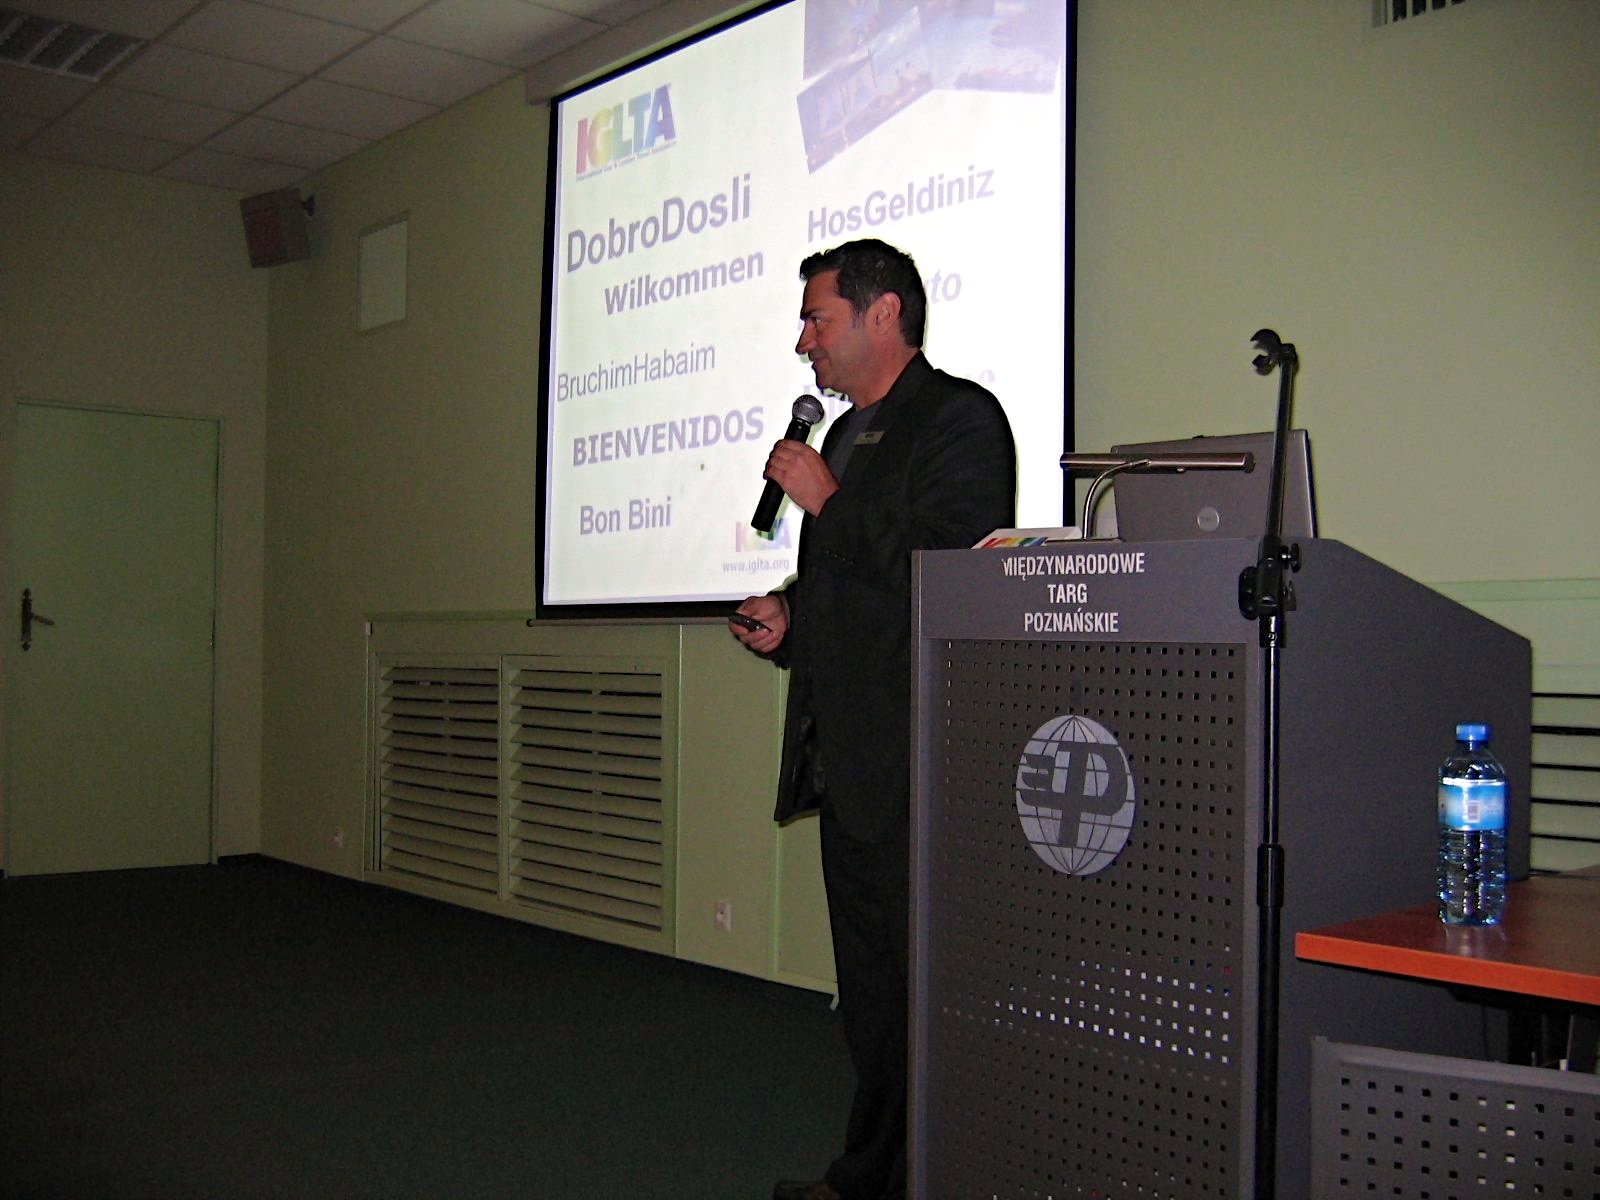 Speaking at a conference in Poland.